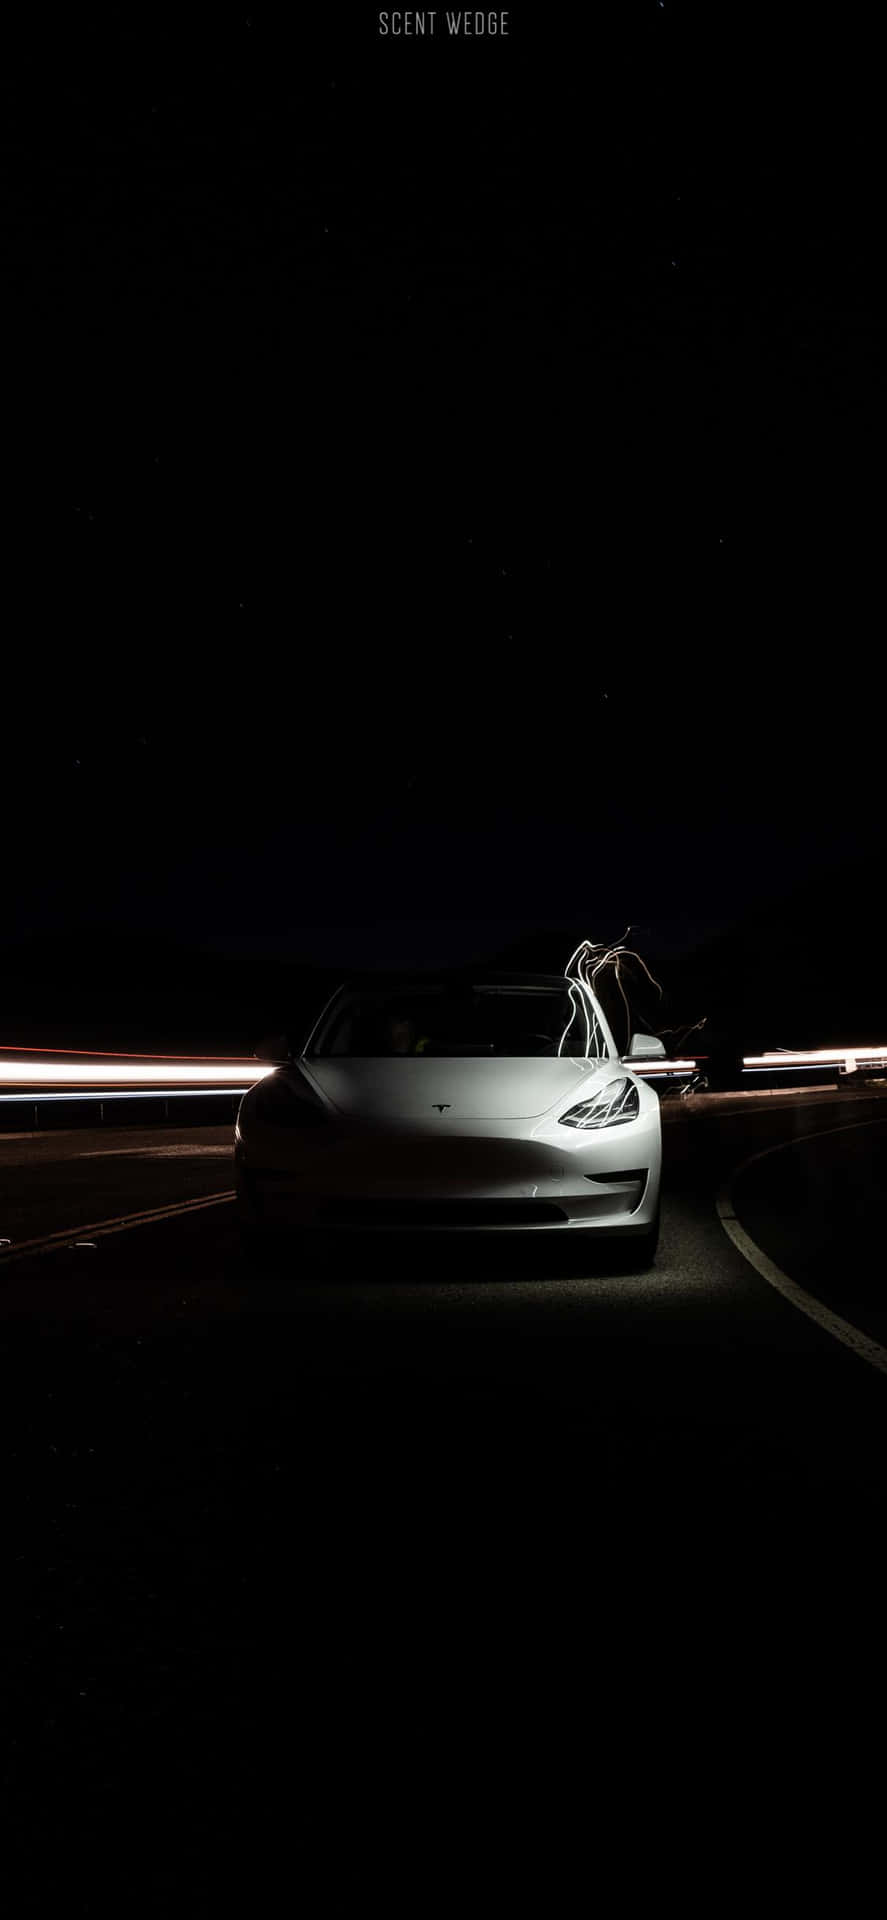 Unlock the power of your #Tesla with the iPhone Wallpaper